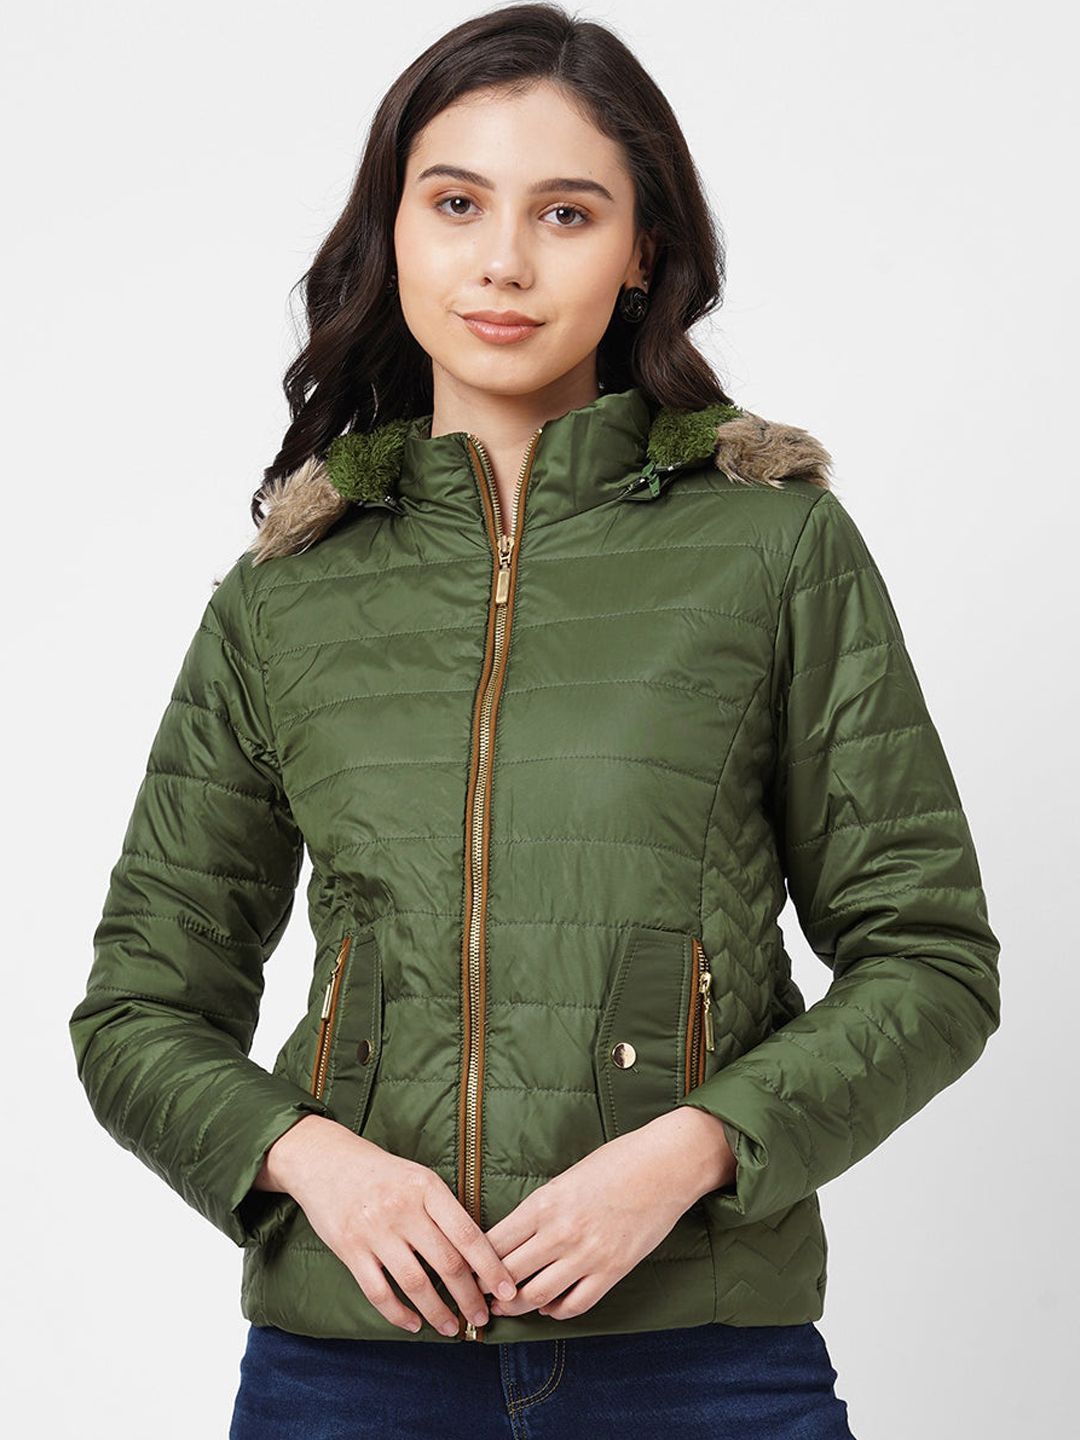 Kraus Jeans Women Olive Green Parka Hooded Jacket Price in India